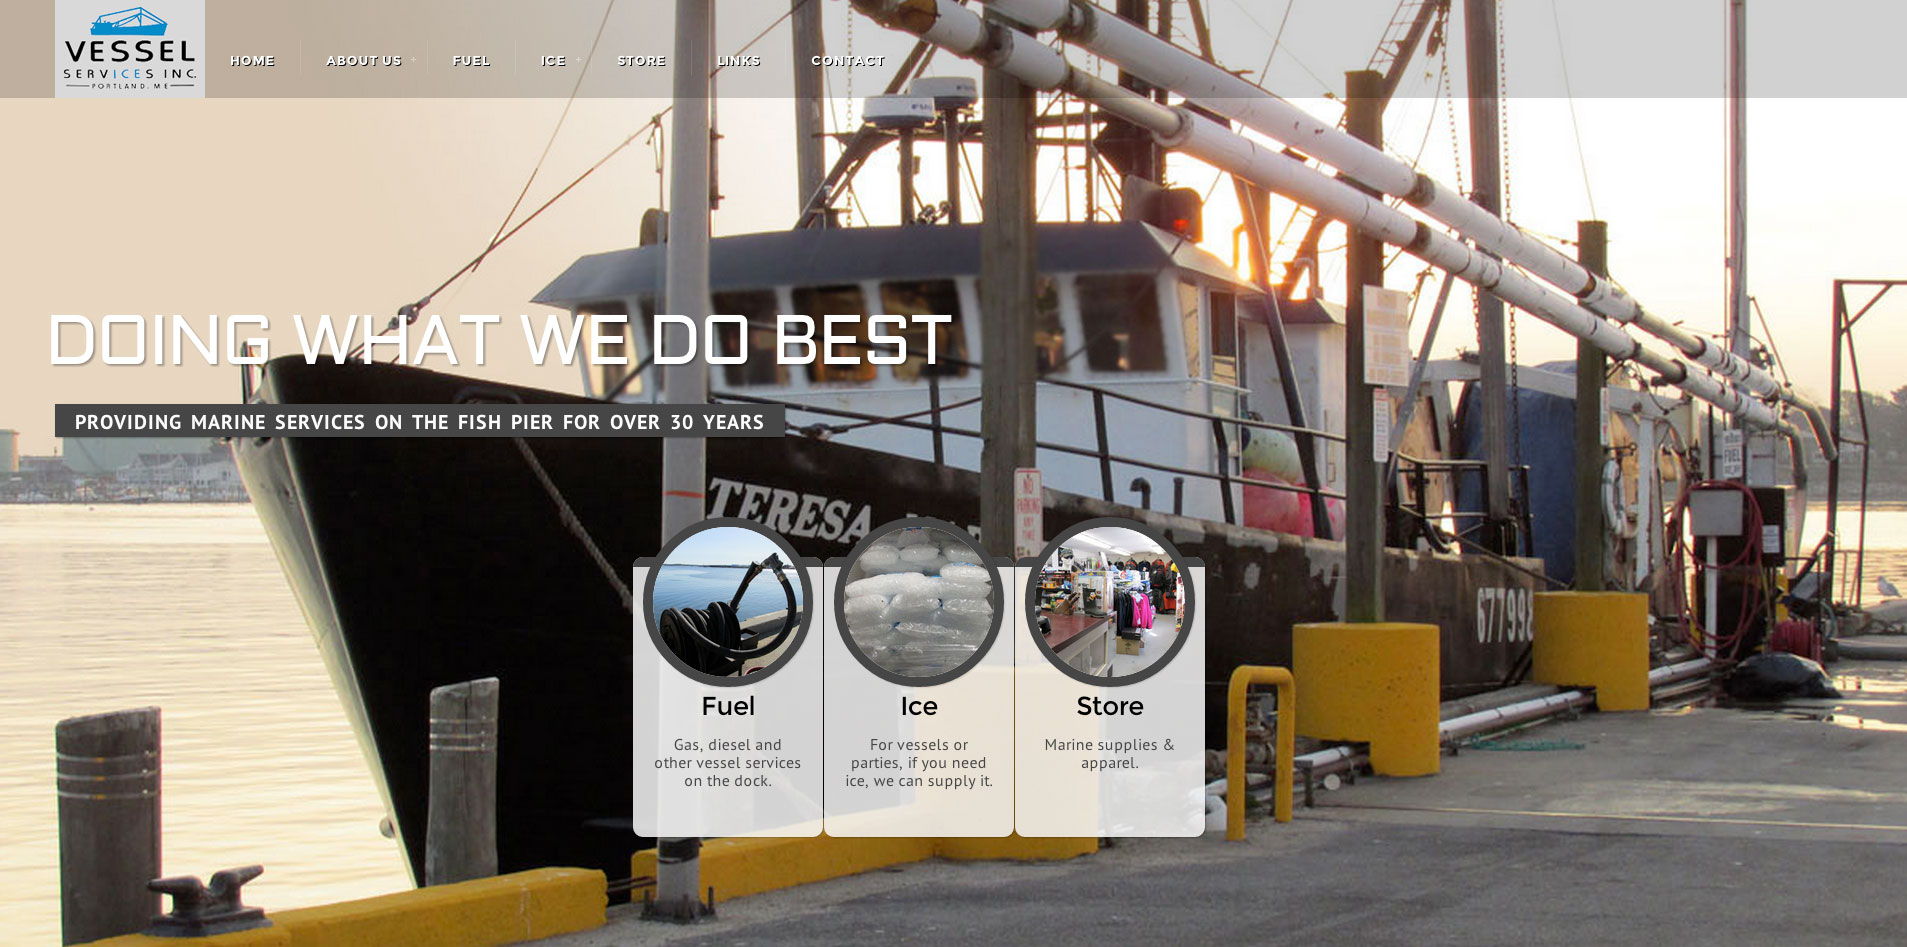 Vessel Services Website Home Page 3